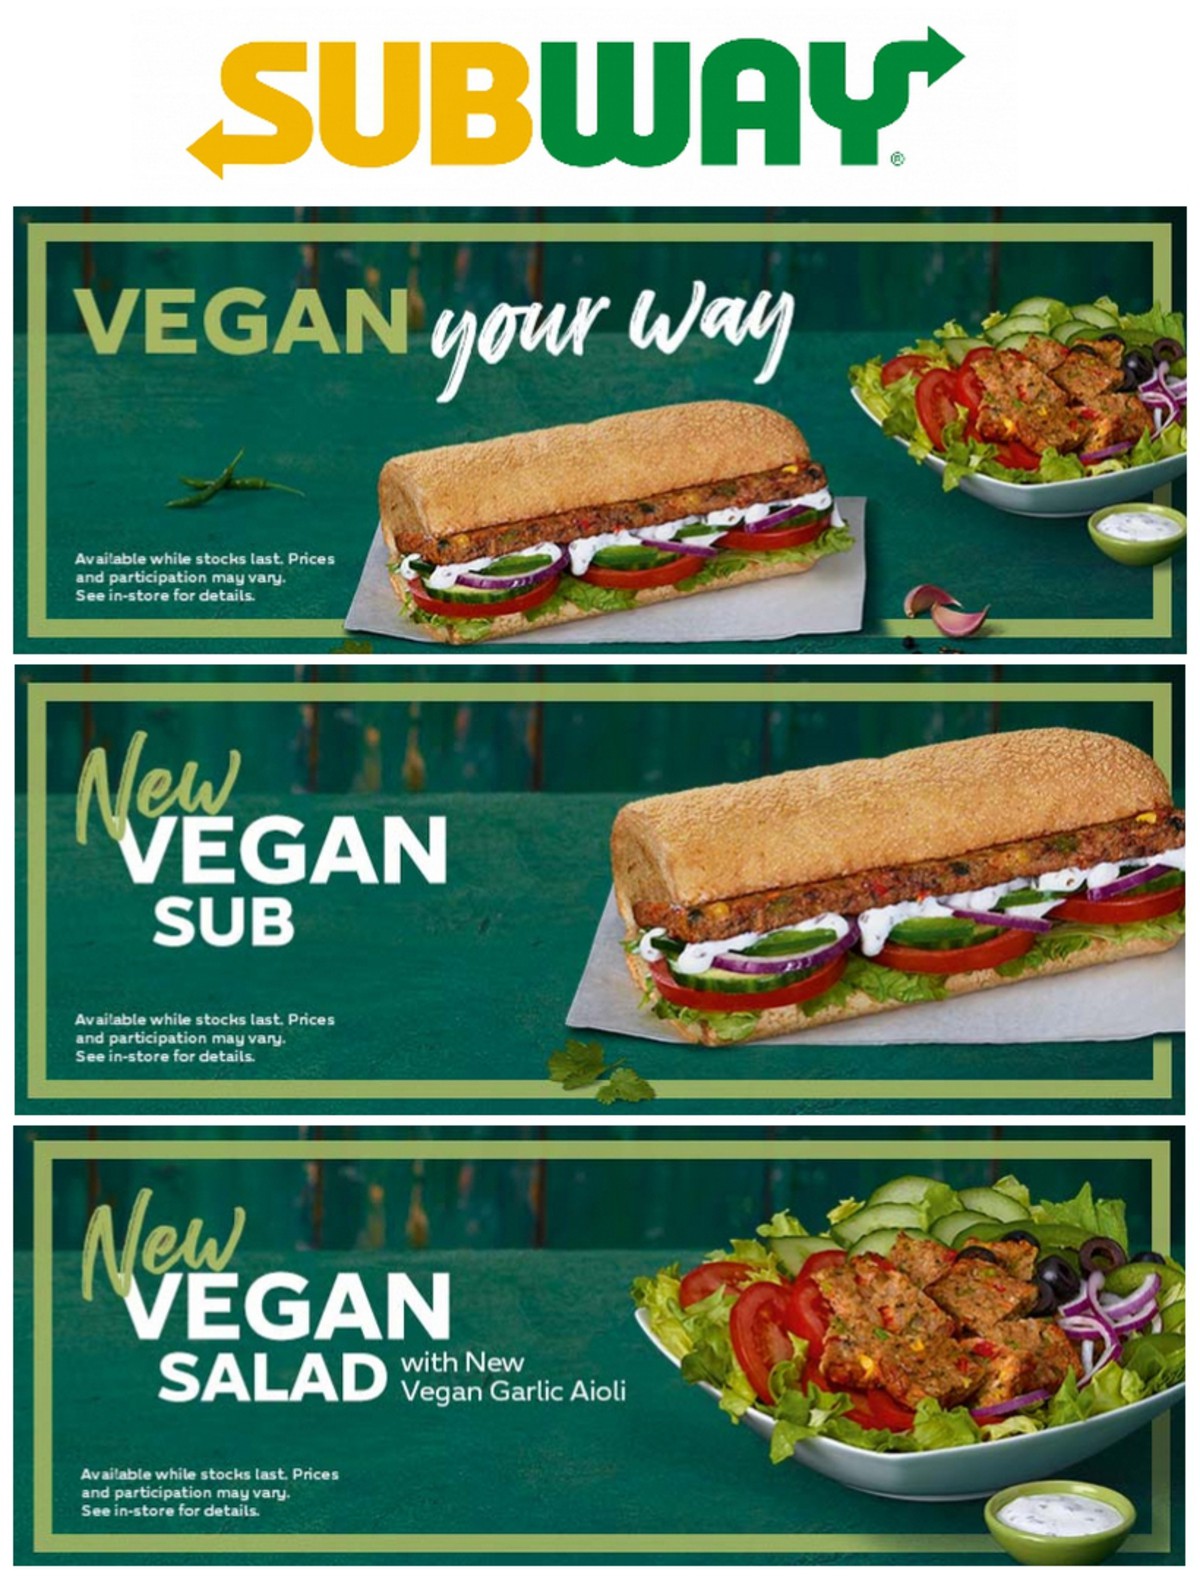 SUBWAY Vegan Offers from 1 April